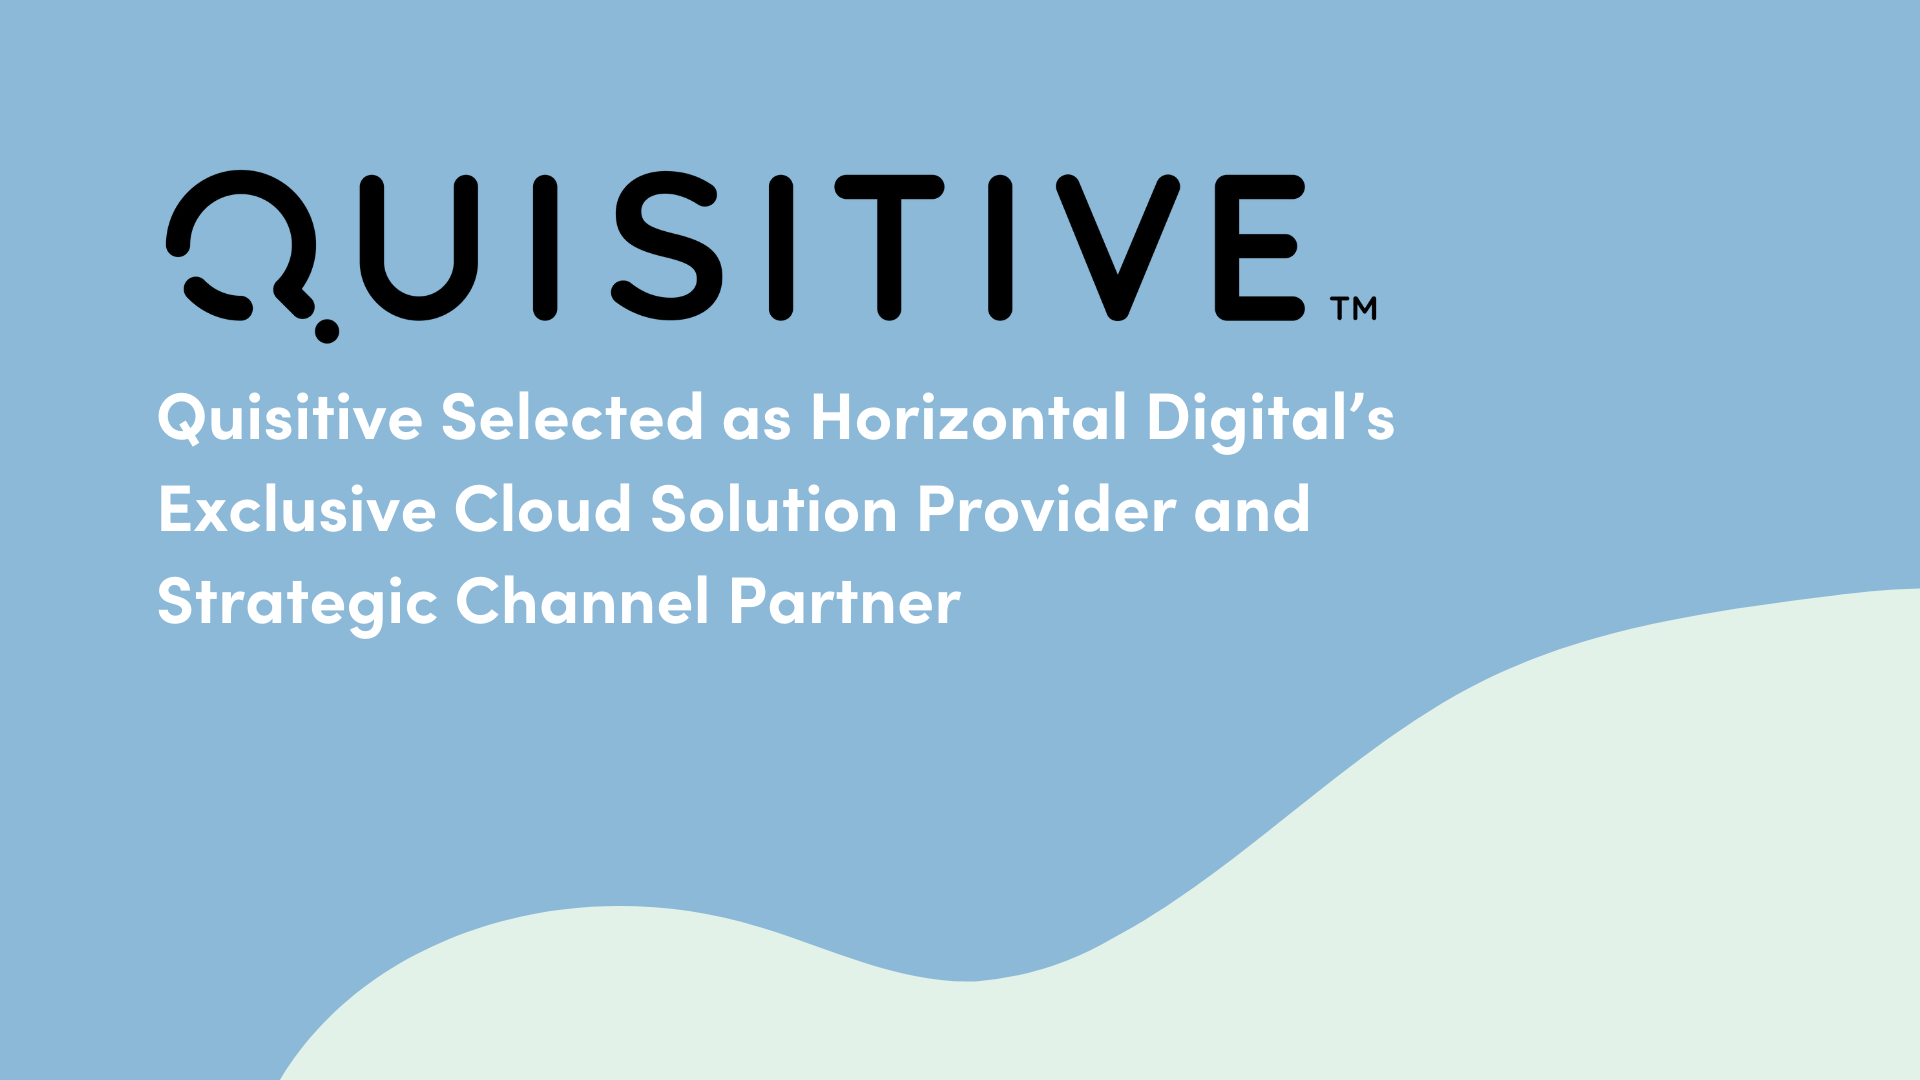 Blue and green image with the Quisitive logo and reads "Quisitive selected as Horizontal Digital's Exclusive Cloud Solution Provider and Strategic Channel Partner"